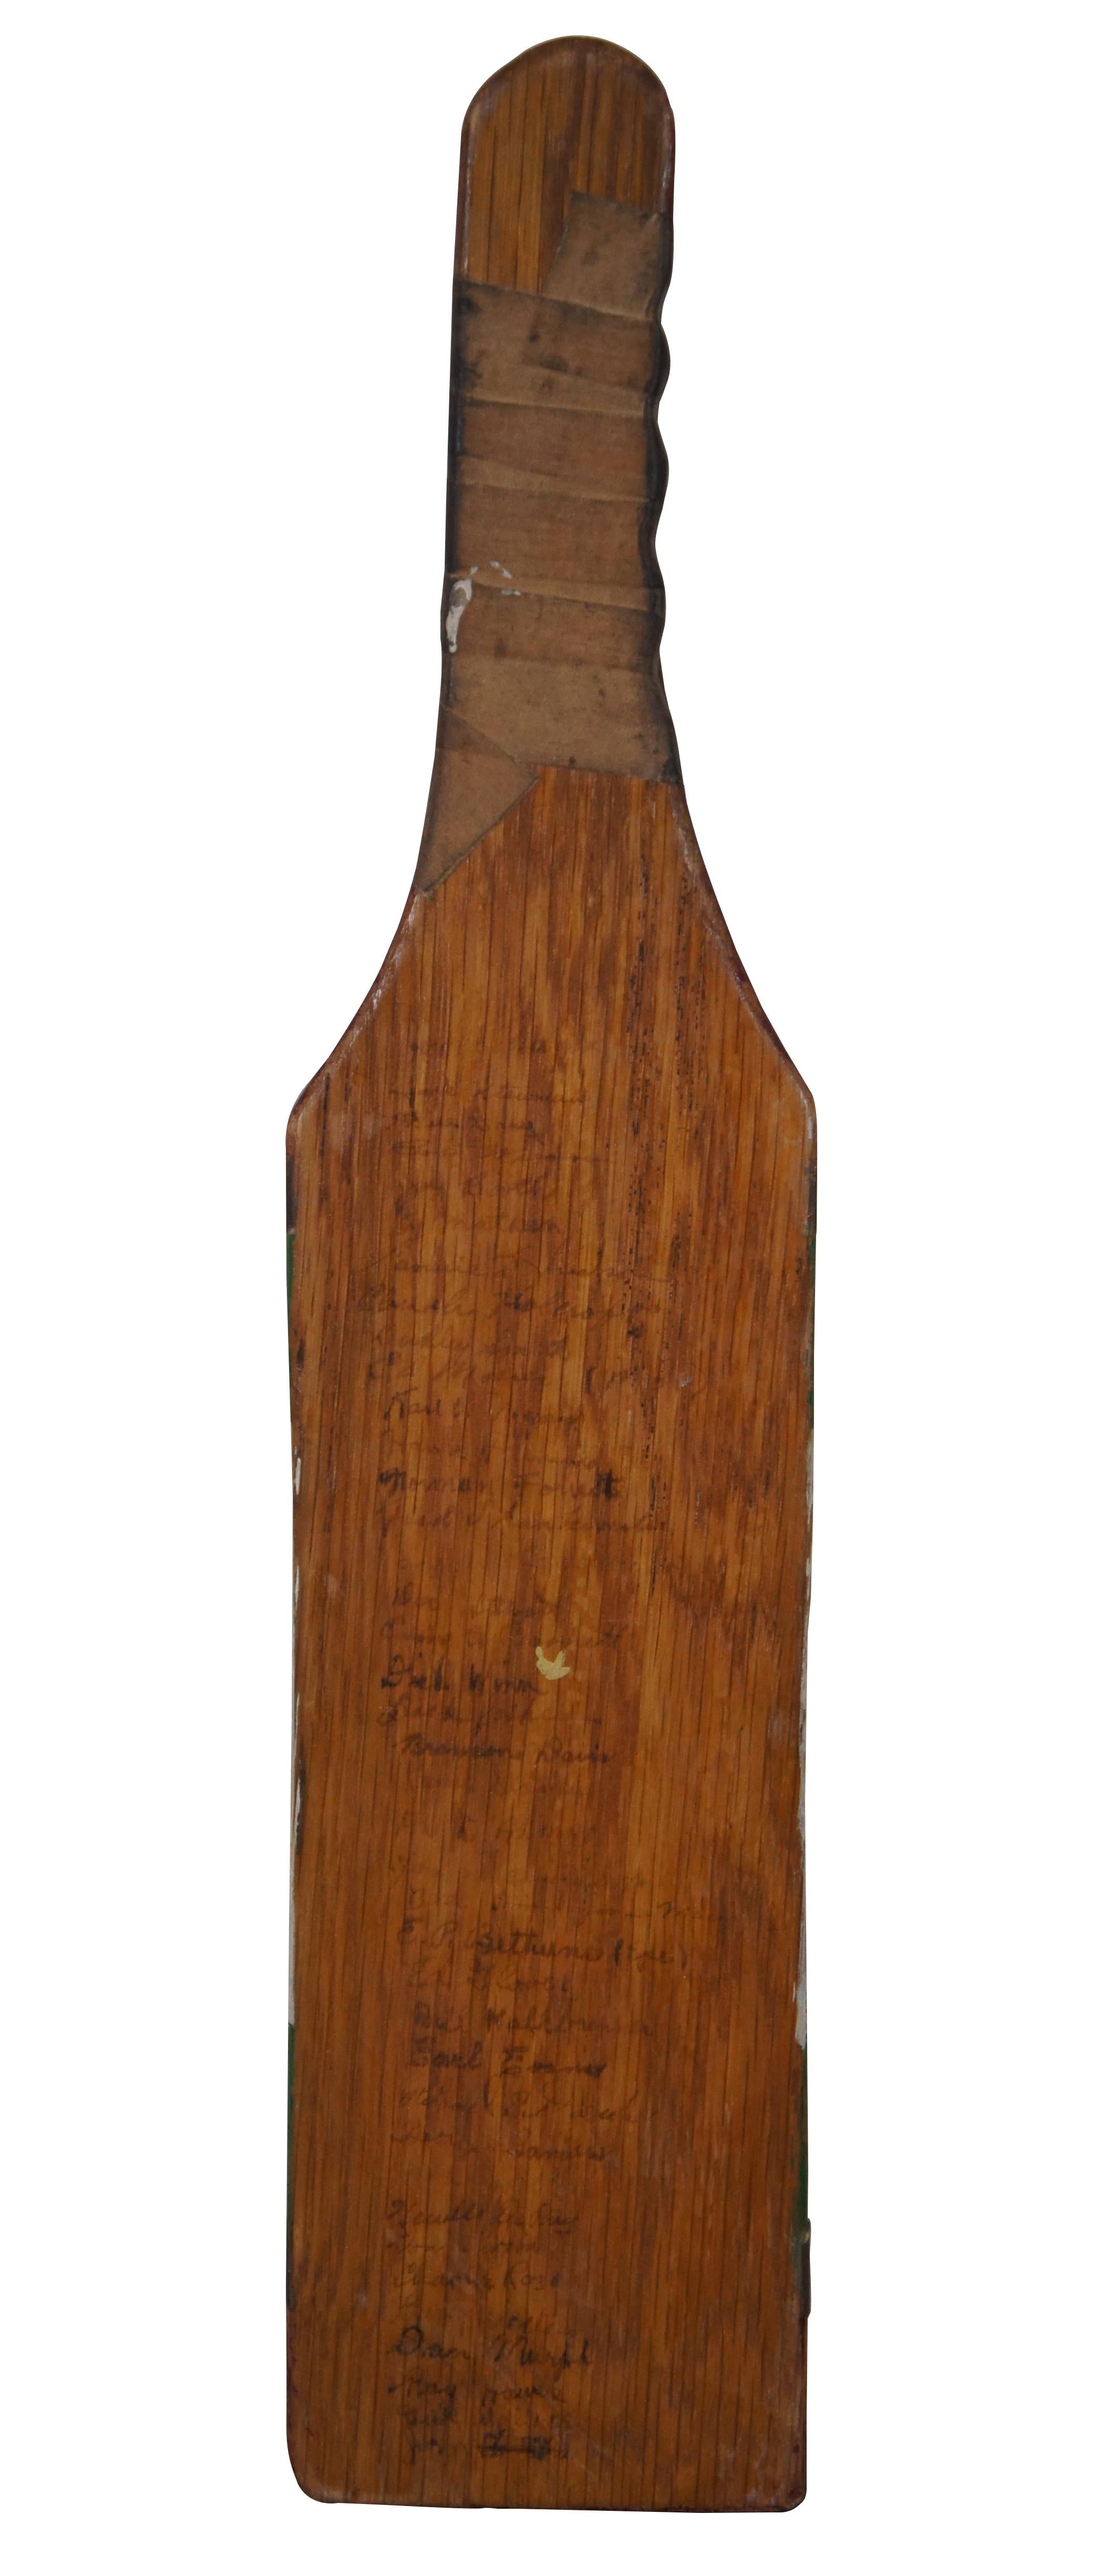 Mid 20th century Kappa Sigma fraternity wooden pledge hazing paddle, fully painted on the front in burgundy, green and white, with applied fraternity logo, taped handle and surname of original owner, (Jack) Gibson. Reverse is signed with the names